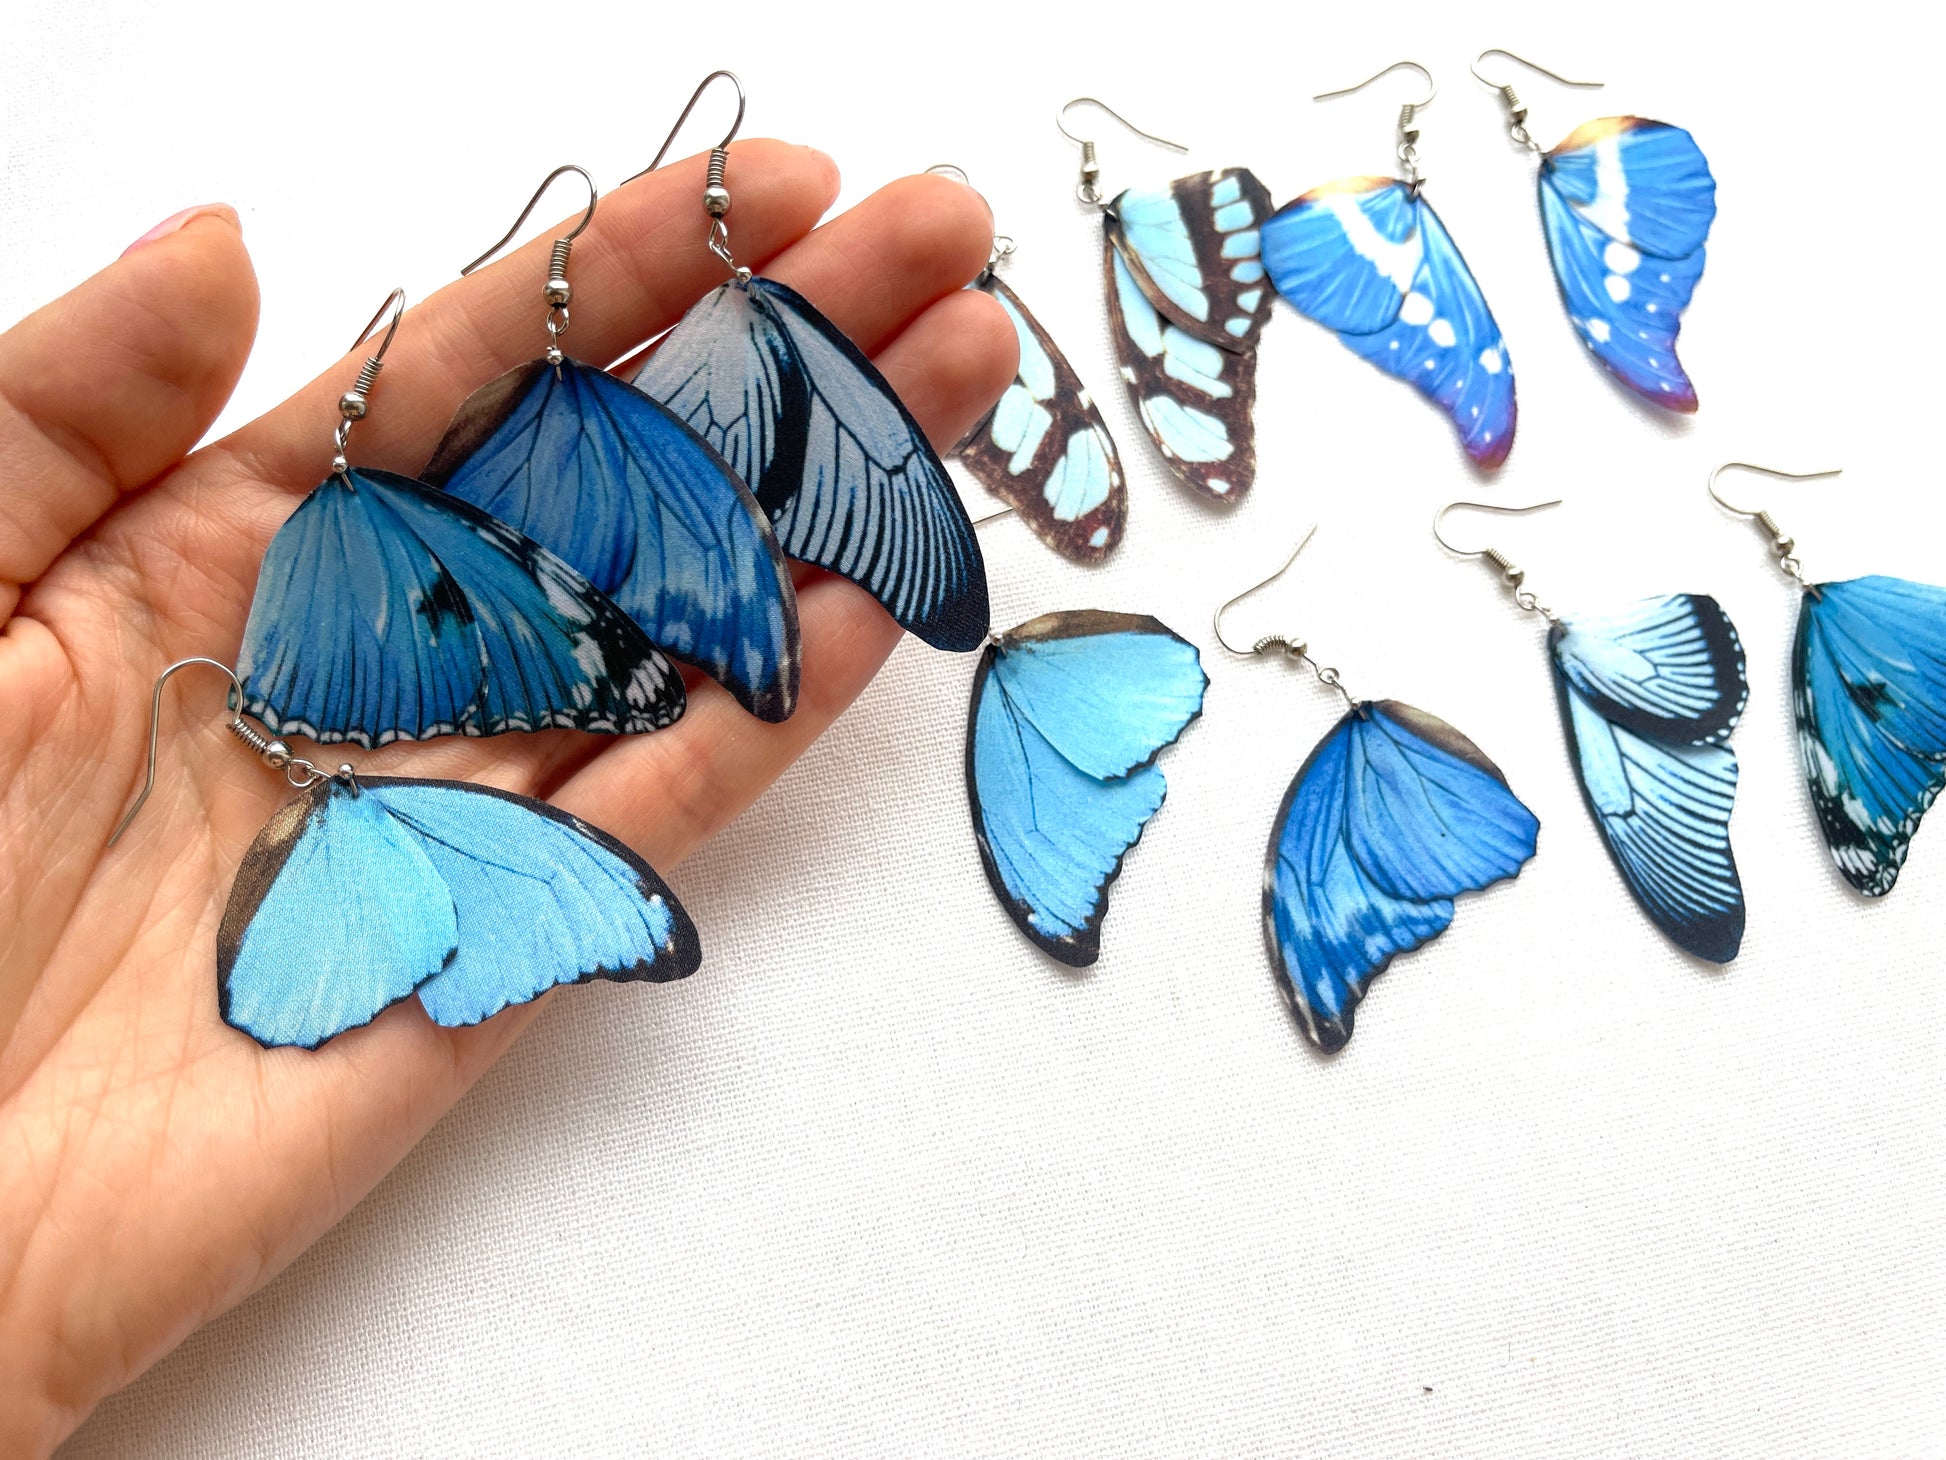 Sparkling blue butterfly wing earrings for special occasions